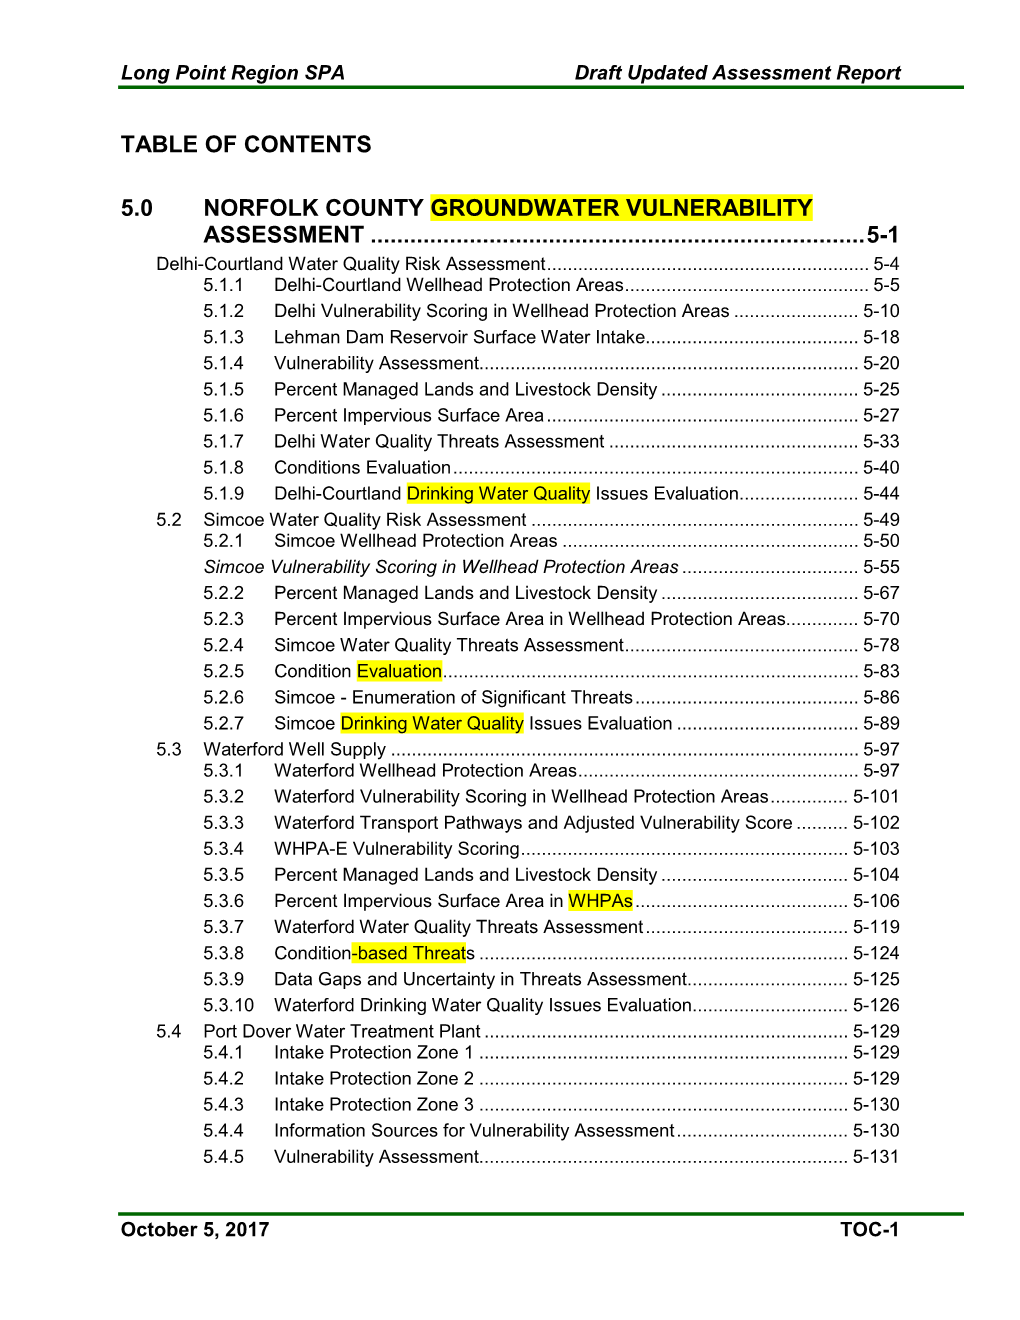 Table of Contents 5.0 Norfolk County Groundwater Vulnerability